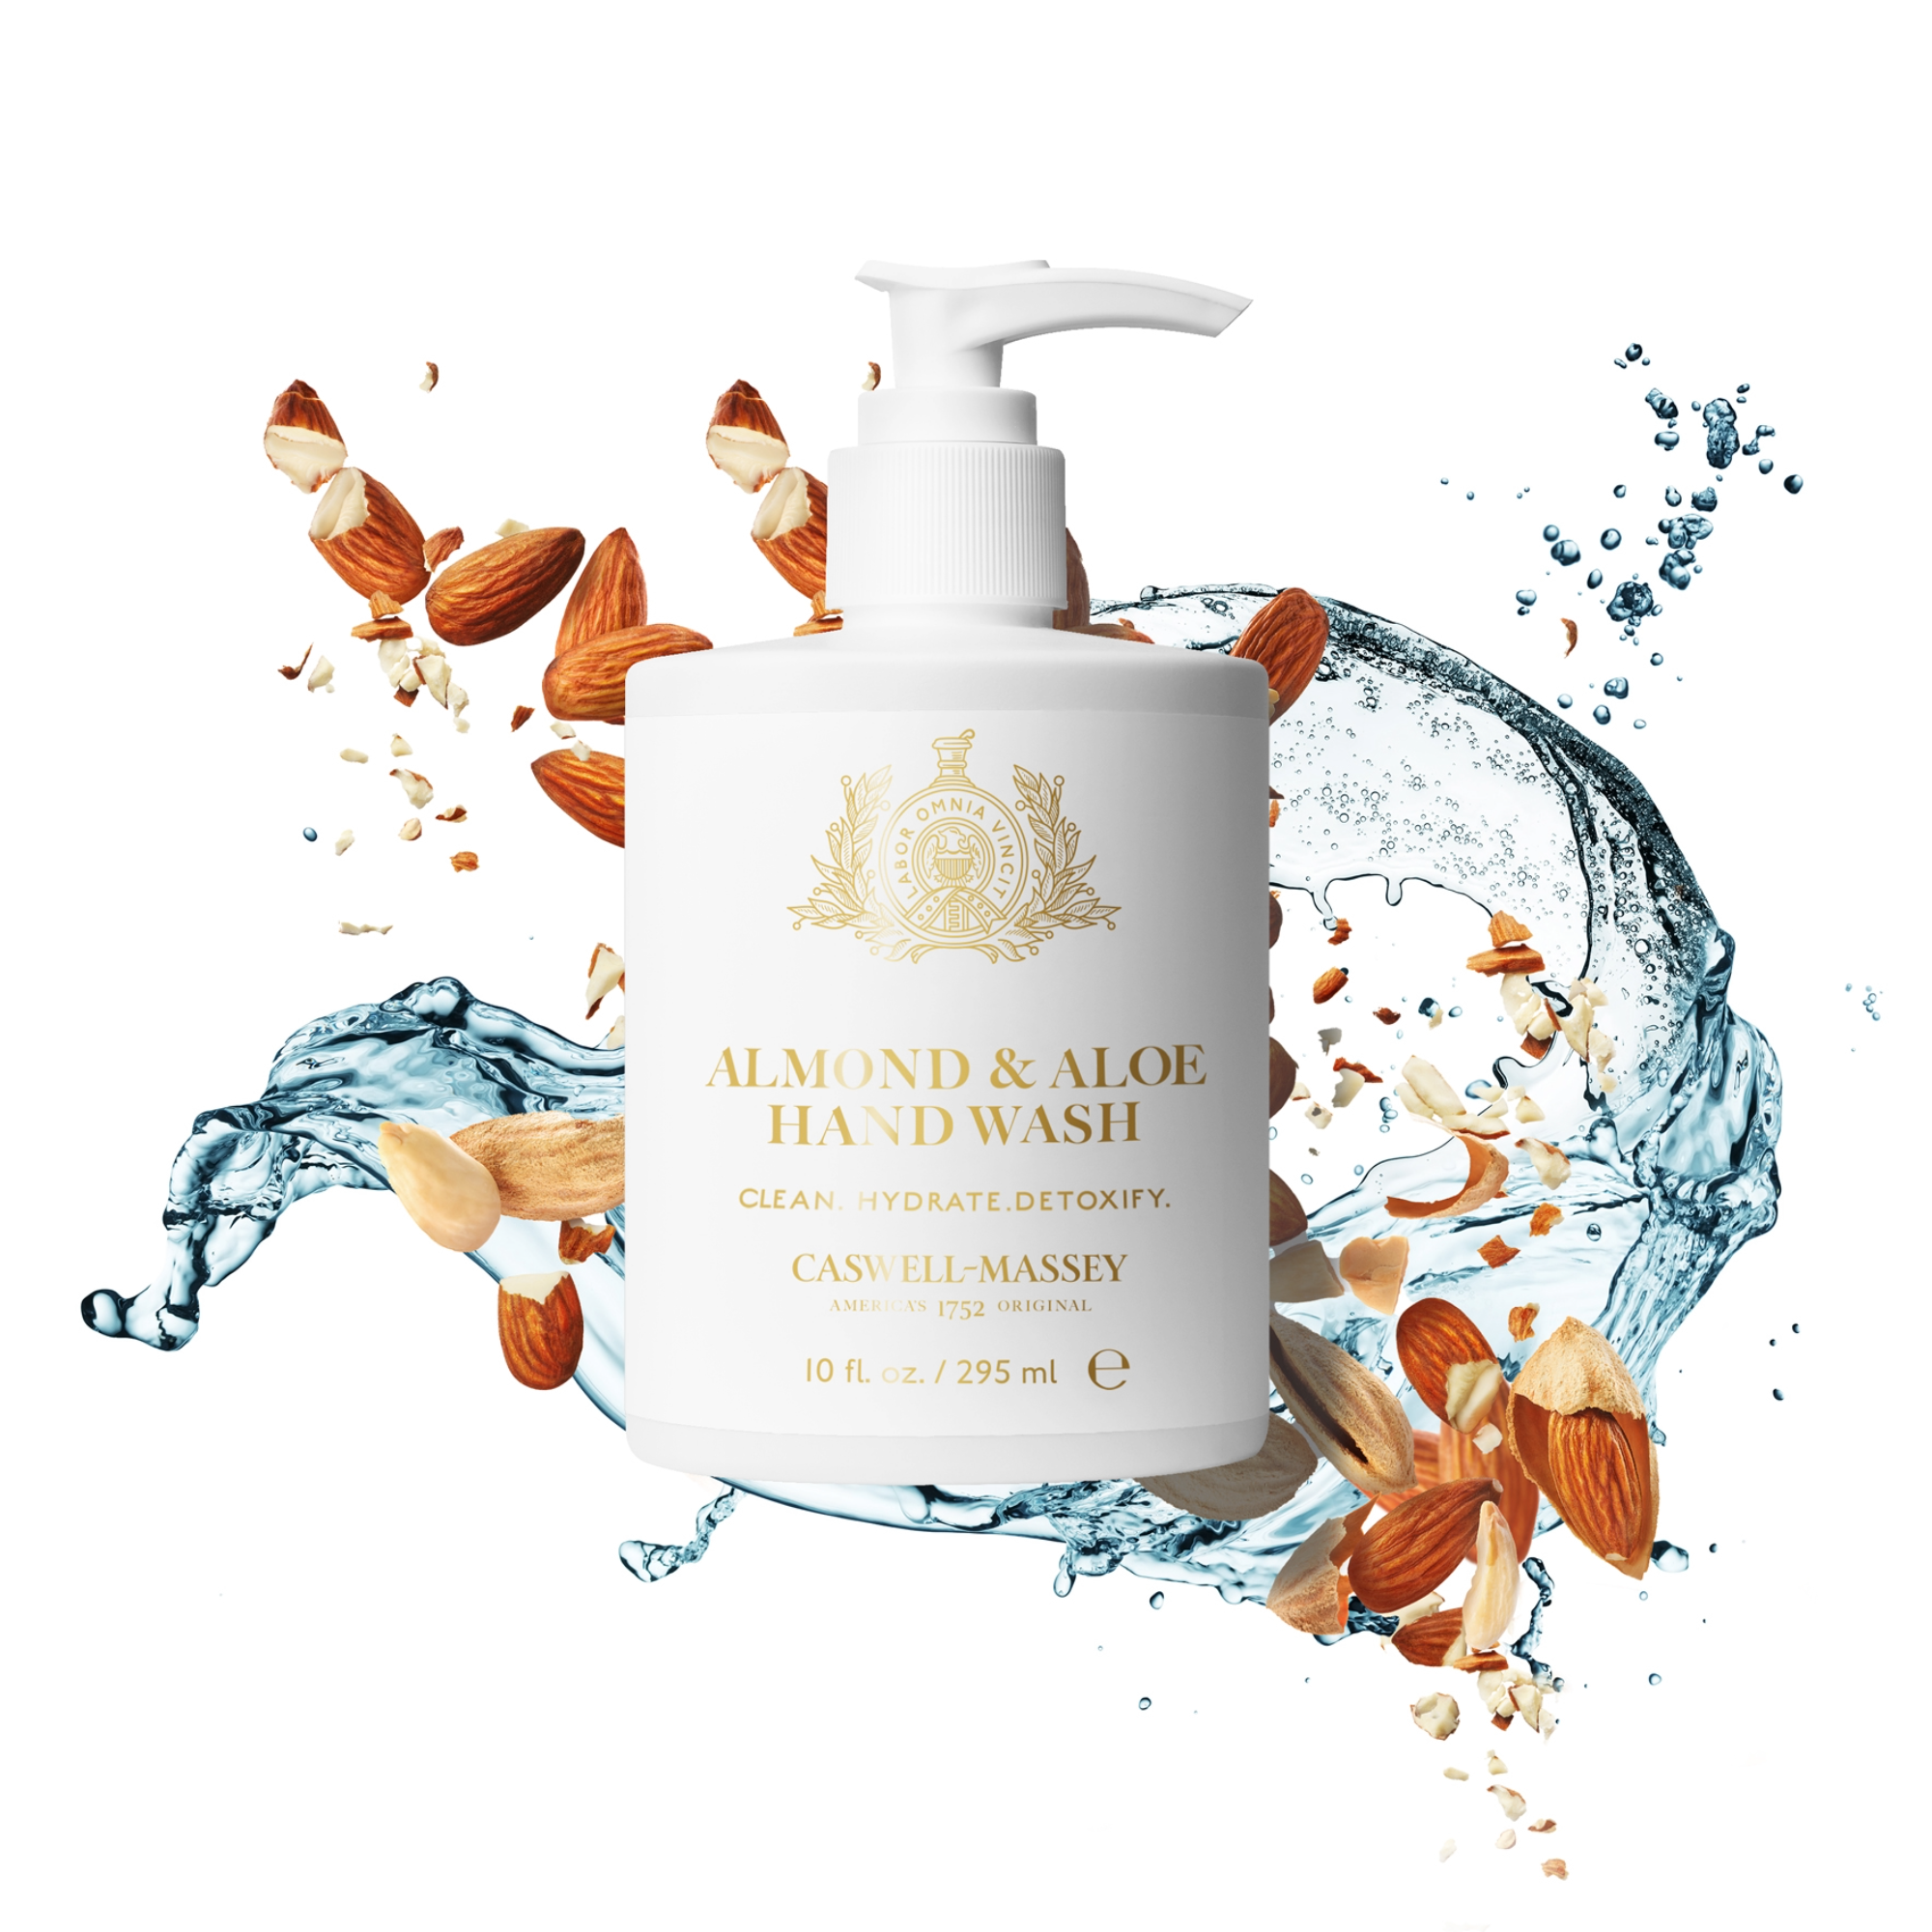 Caswell-Massey Almond and Aloe Hand Wash, 10oz shown with almonds